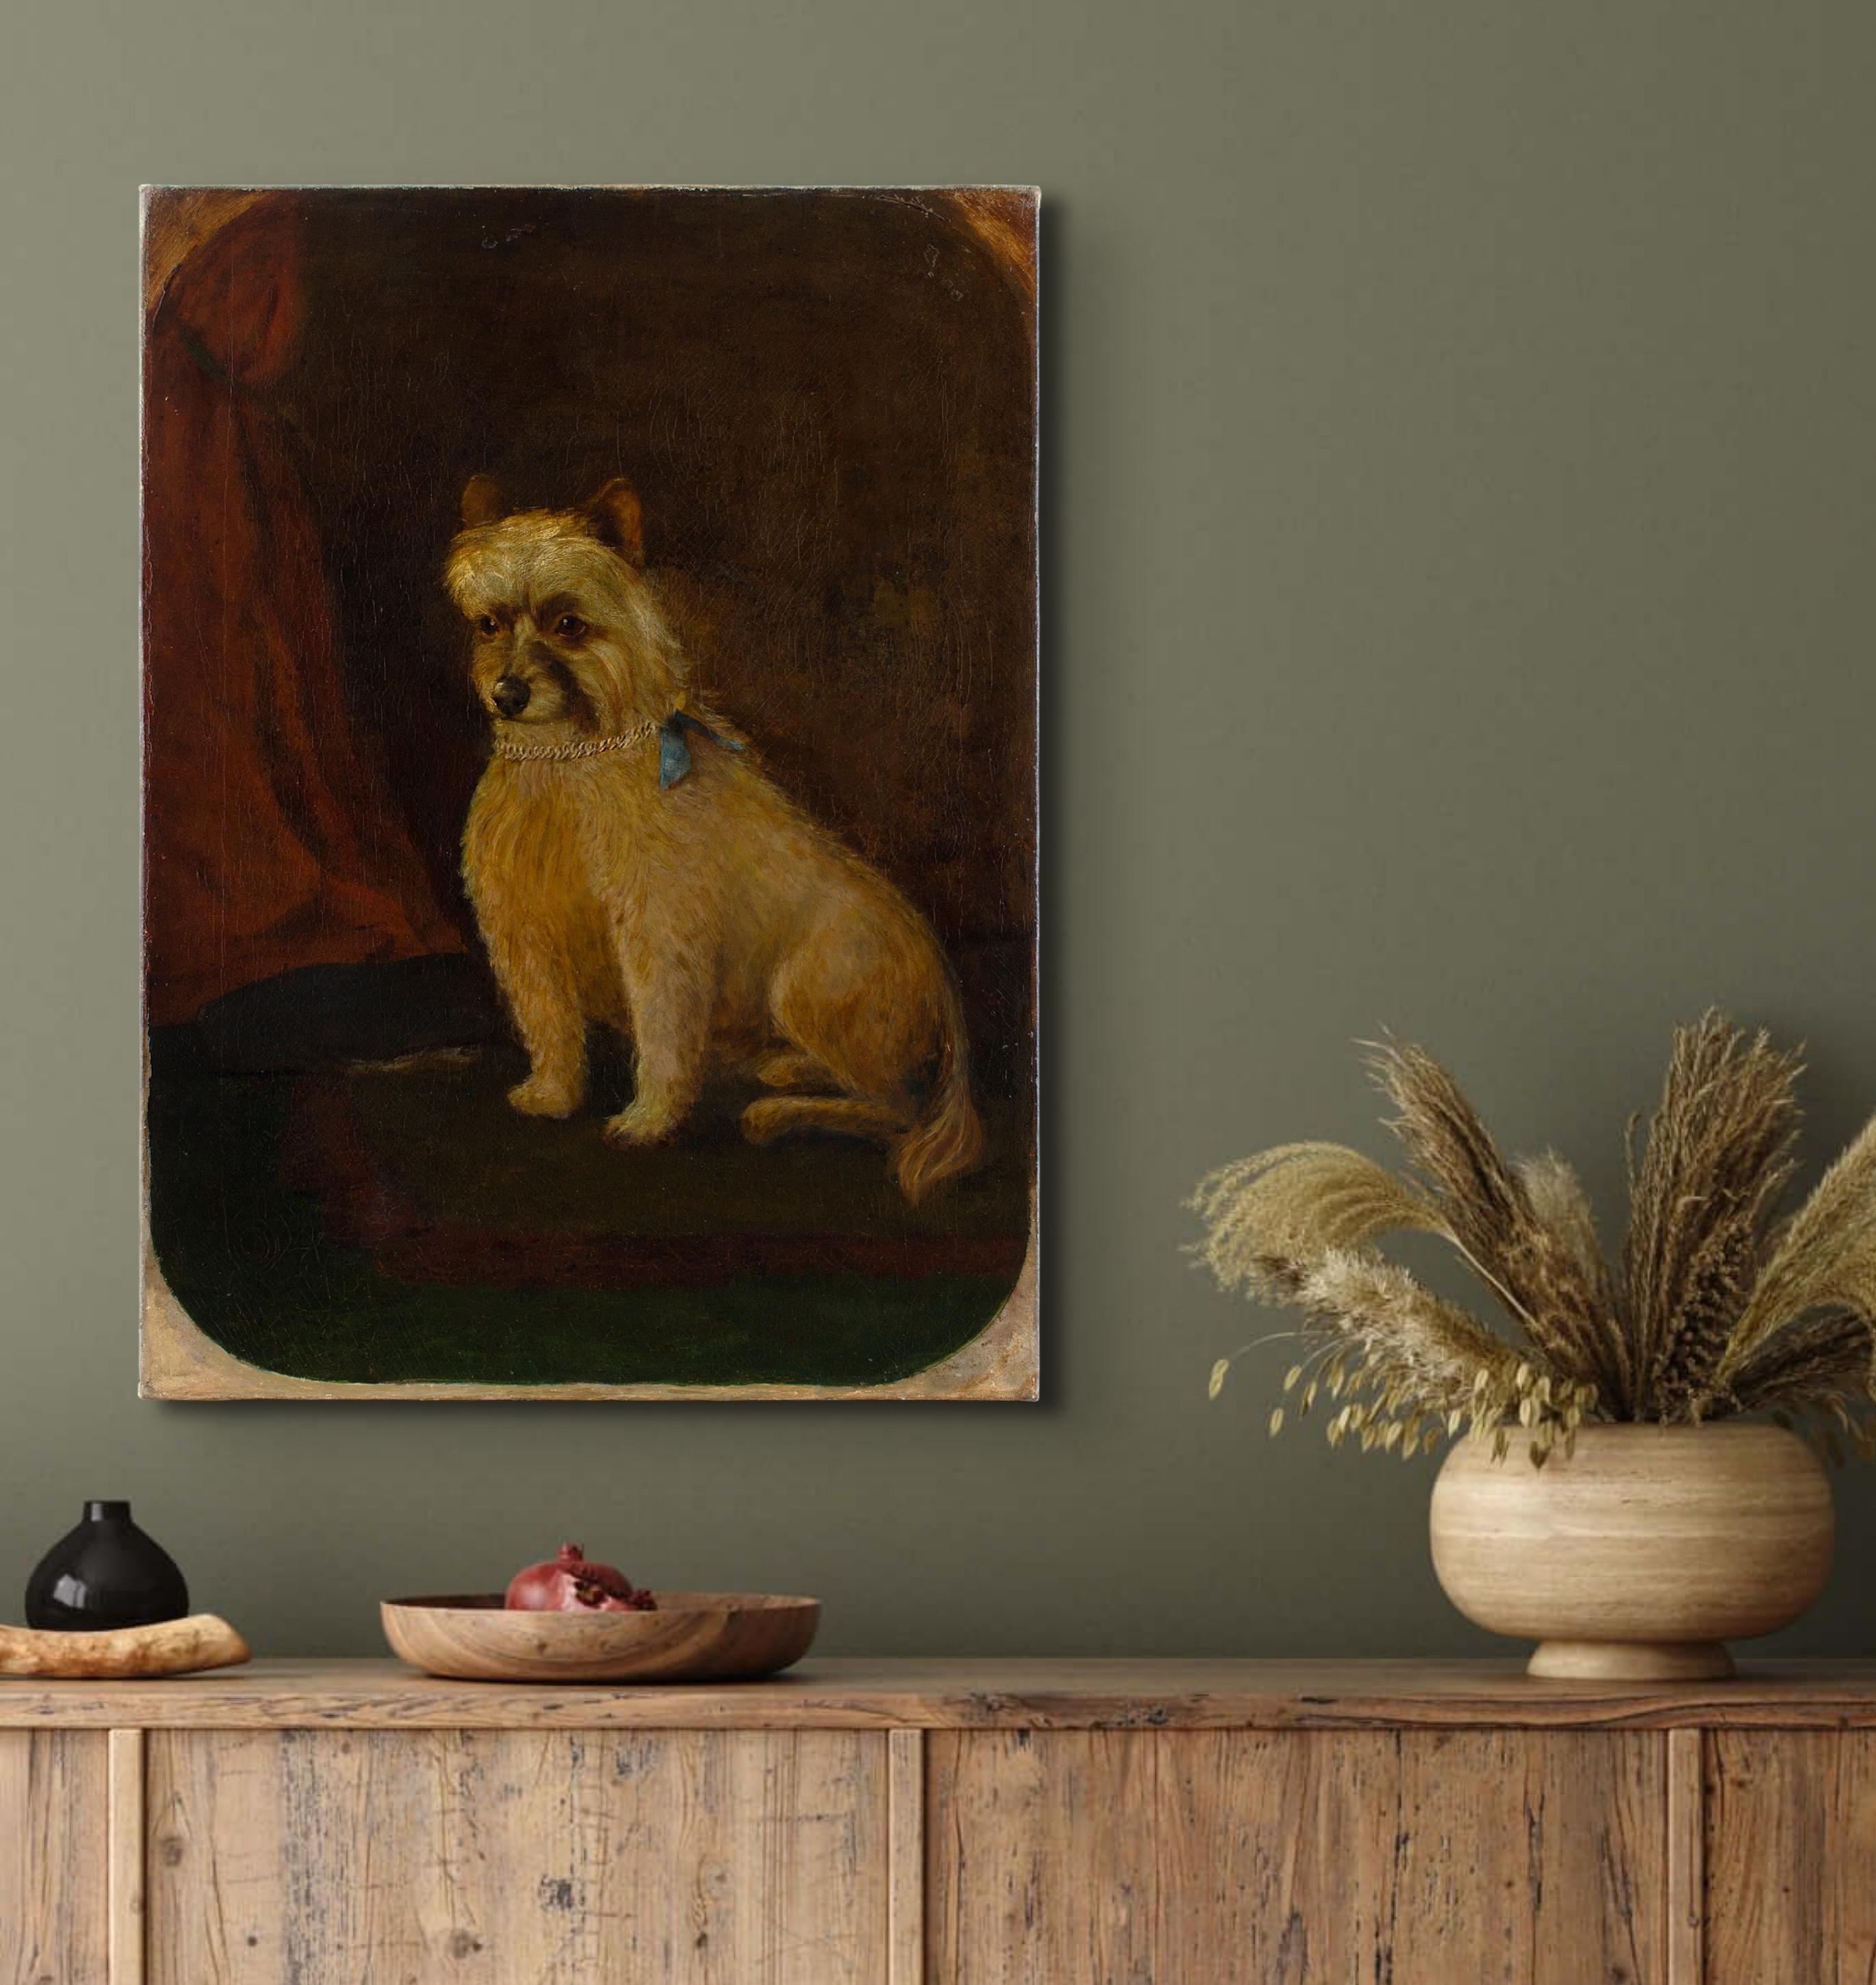 James Coutts Michie ARSA, Portrait Of A Terrier 2